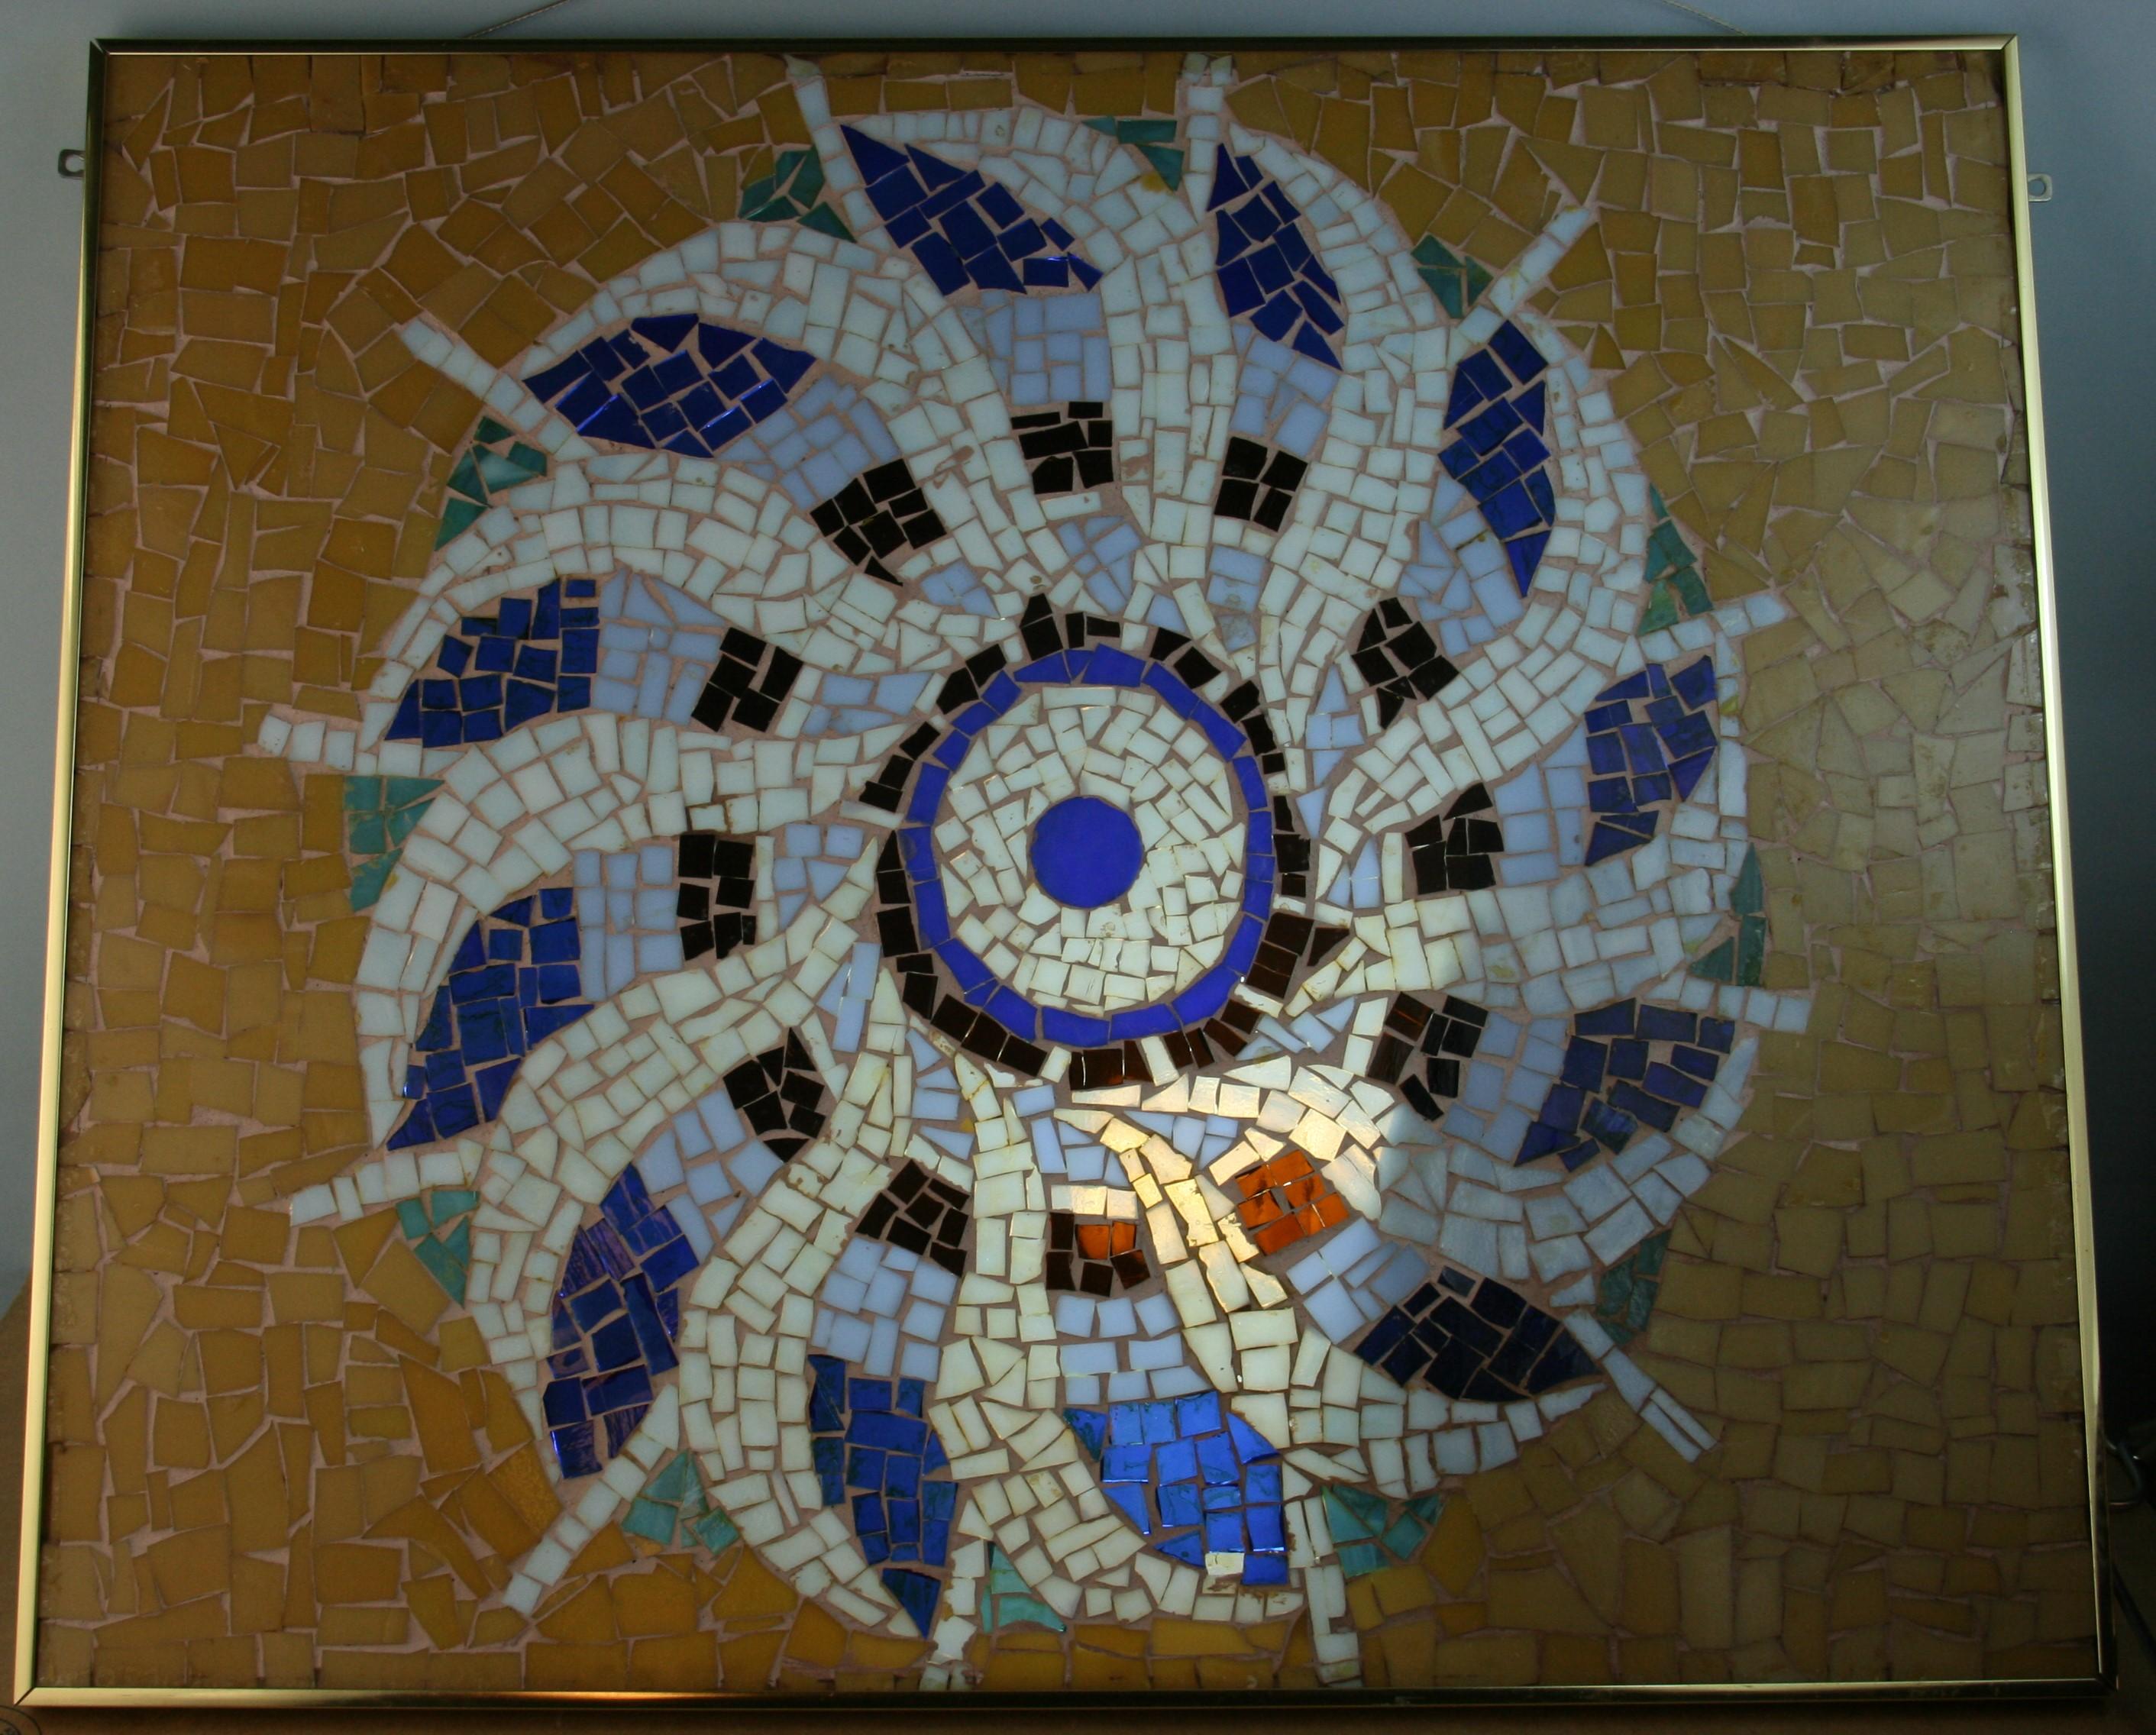 Hand made mosaic / stained glass panel with metal frame.